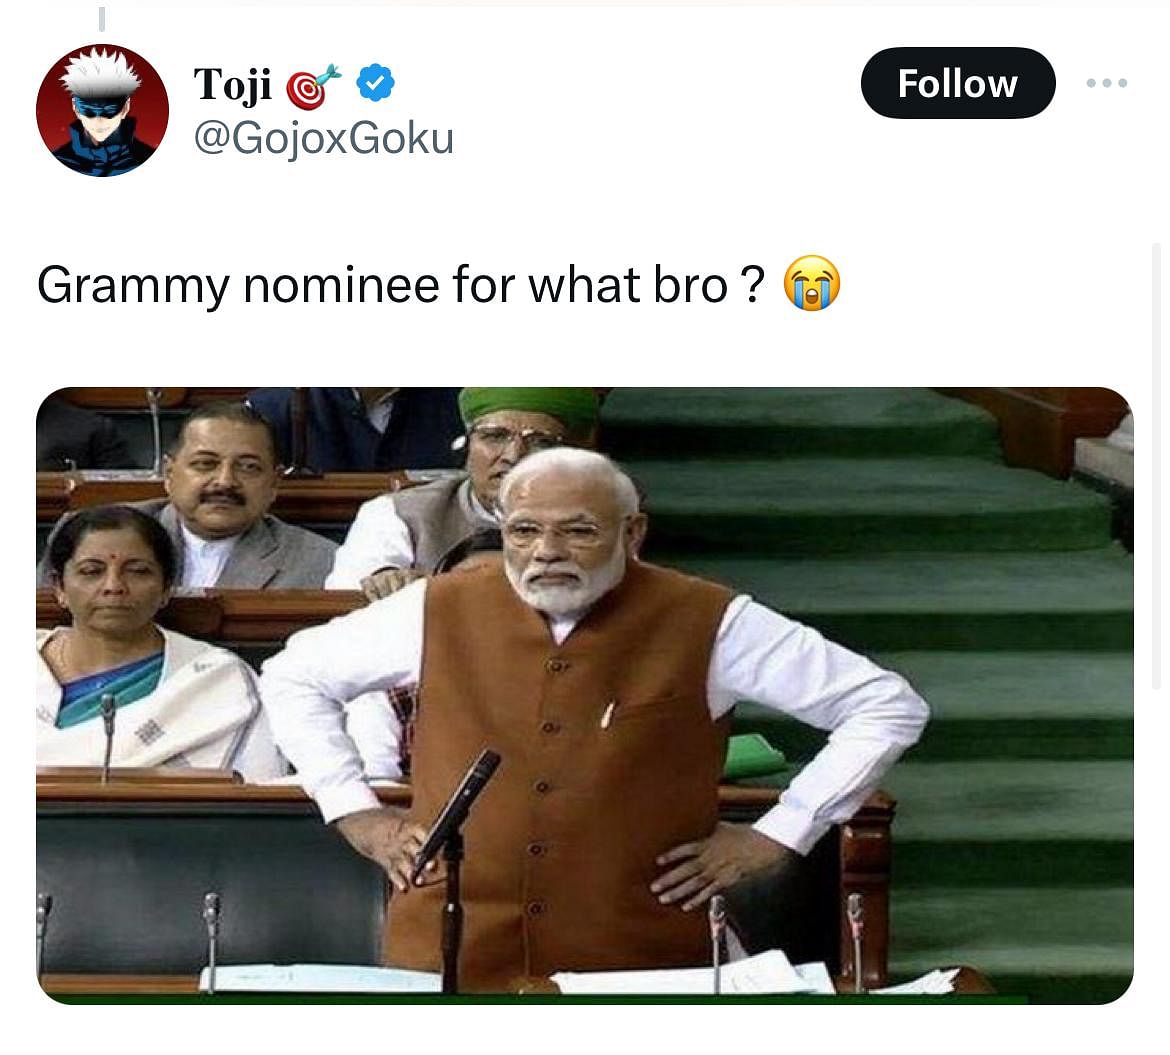 Several social media users are writing, "Can't believe Narendra Modi got a Grammy nomination before BTS did!"